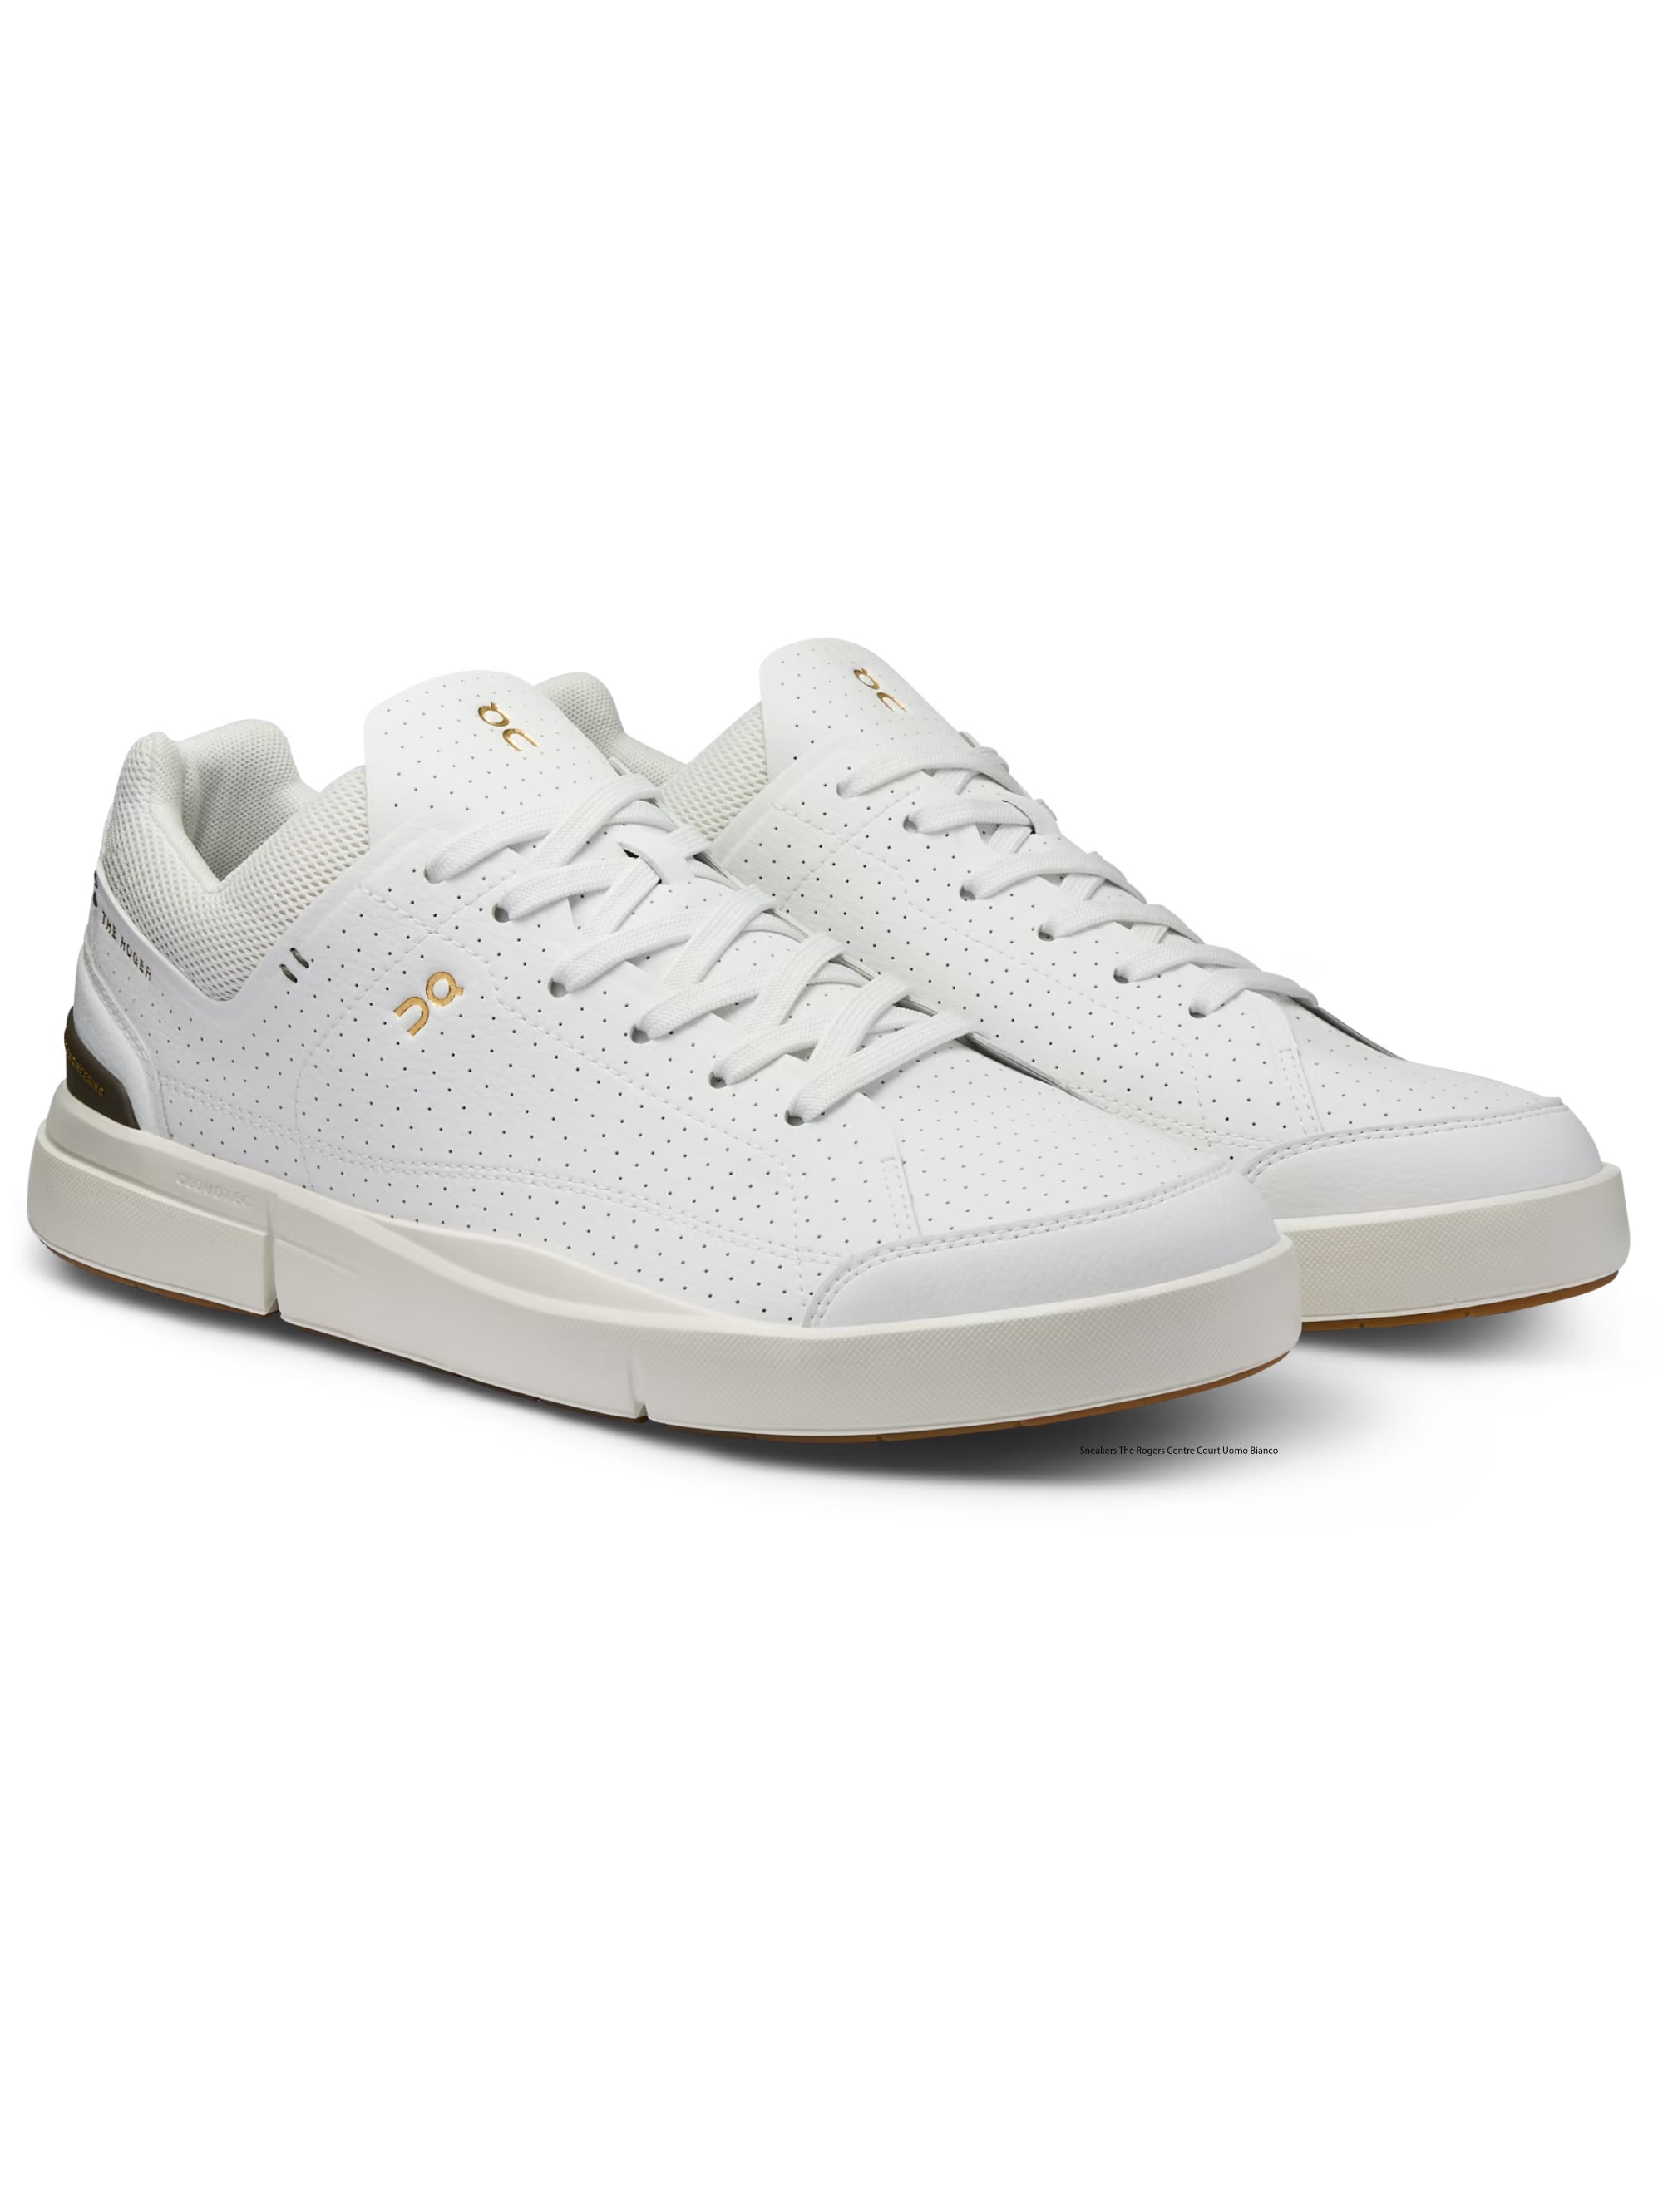 The Rogers Center Court Men's Sneakers White/Green